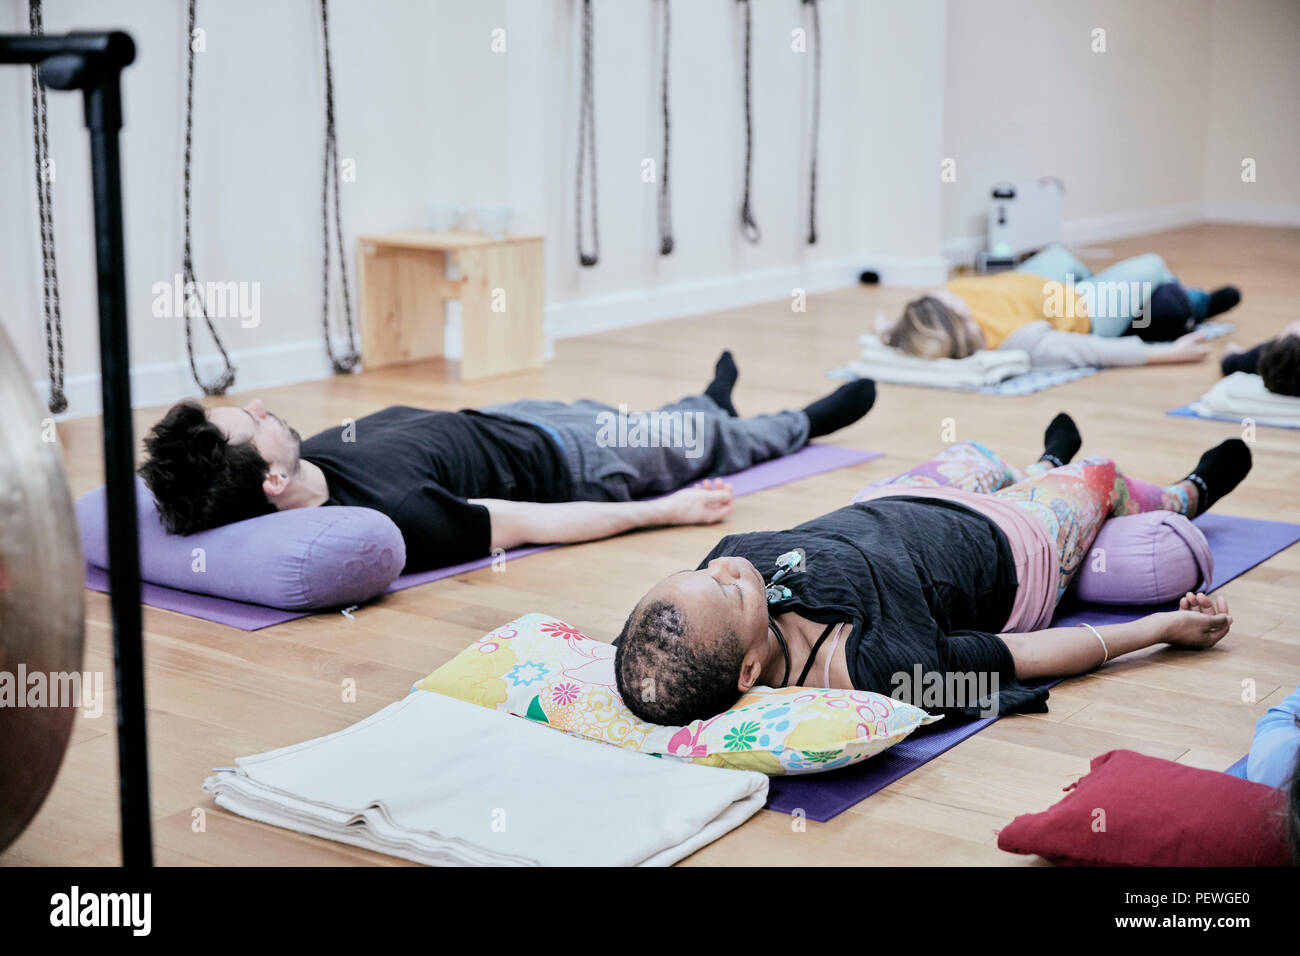 People Lying Down On An Exercise Studio Floor Relaxing After A